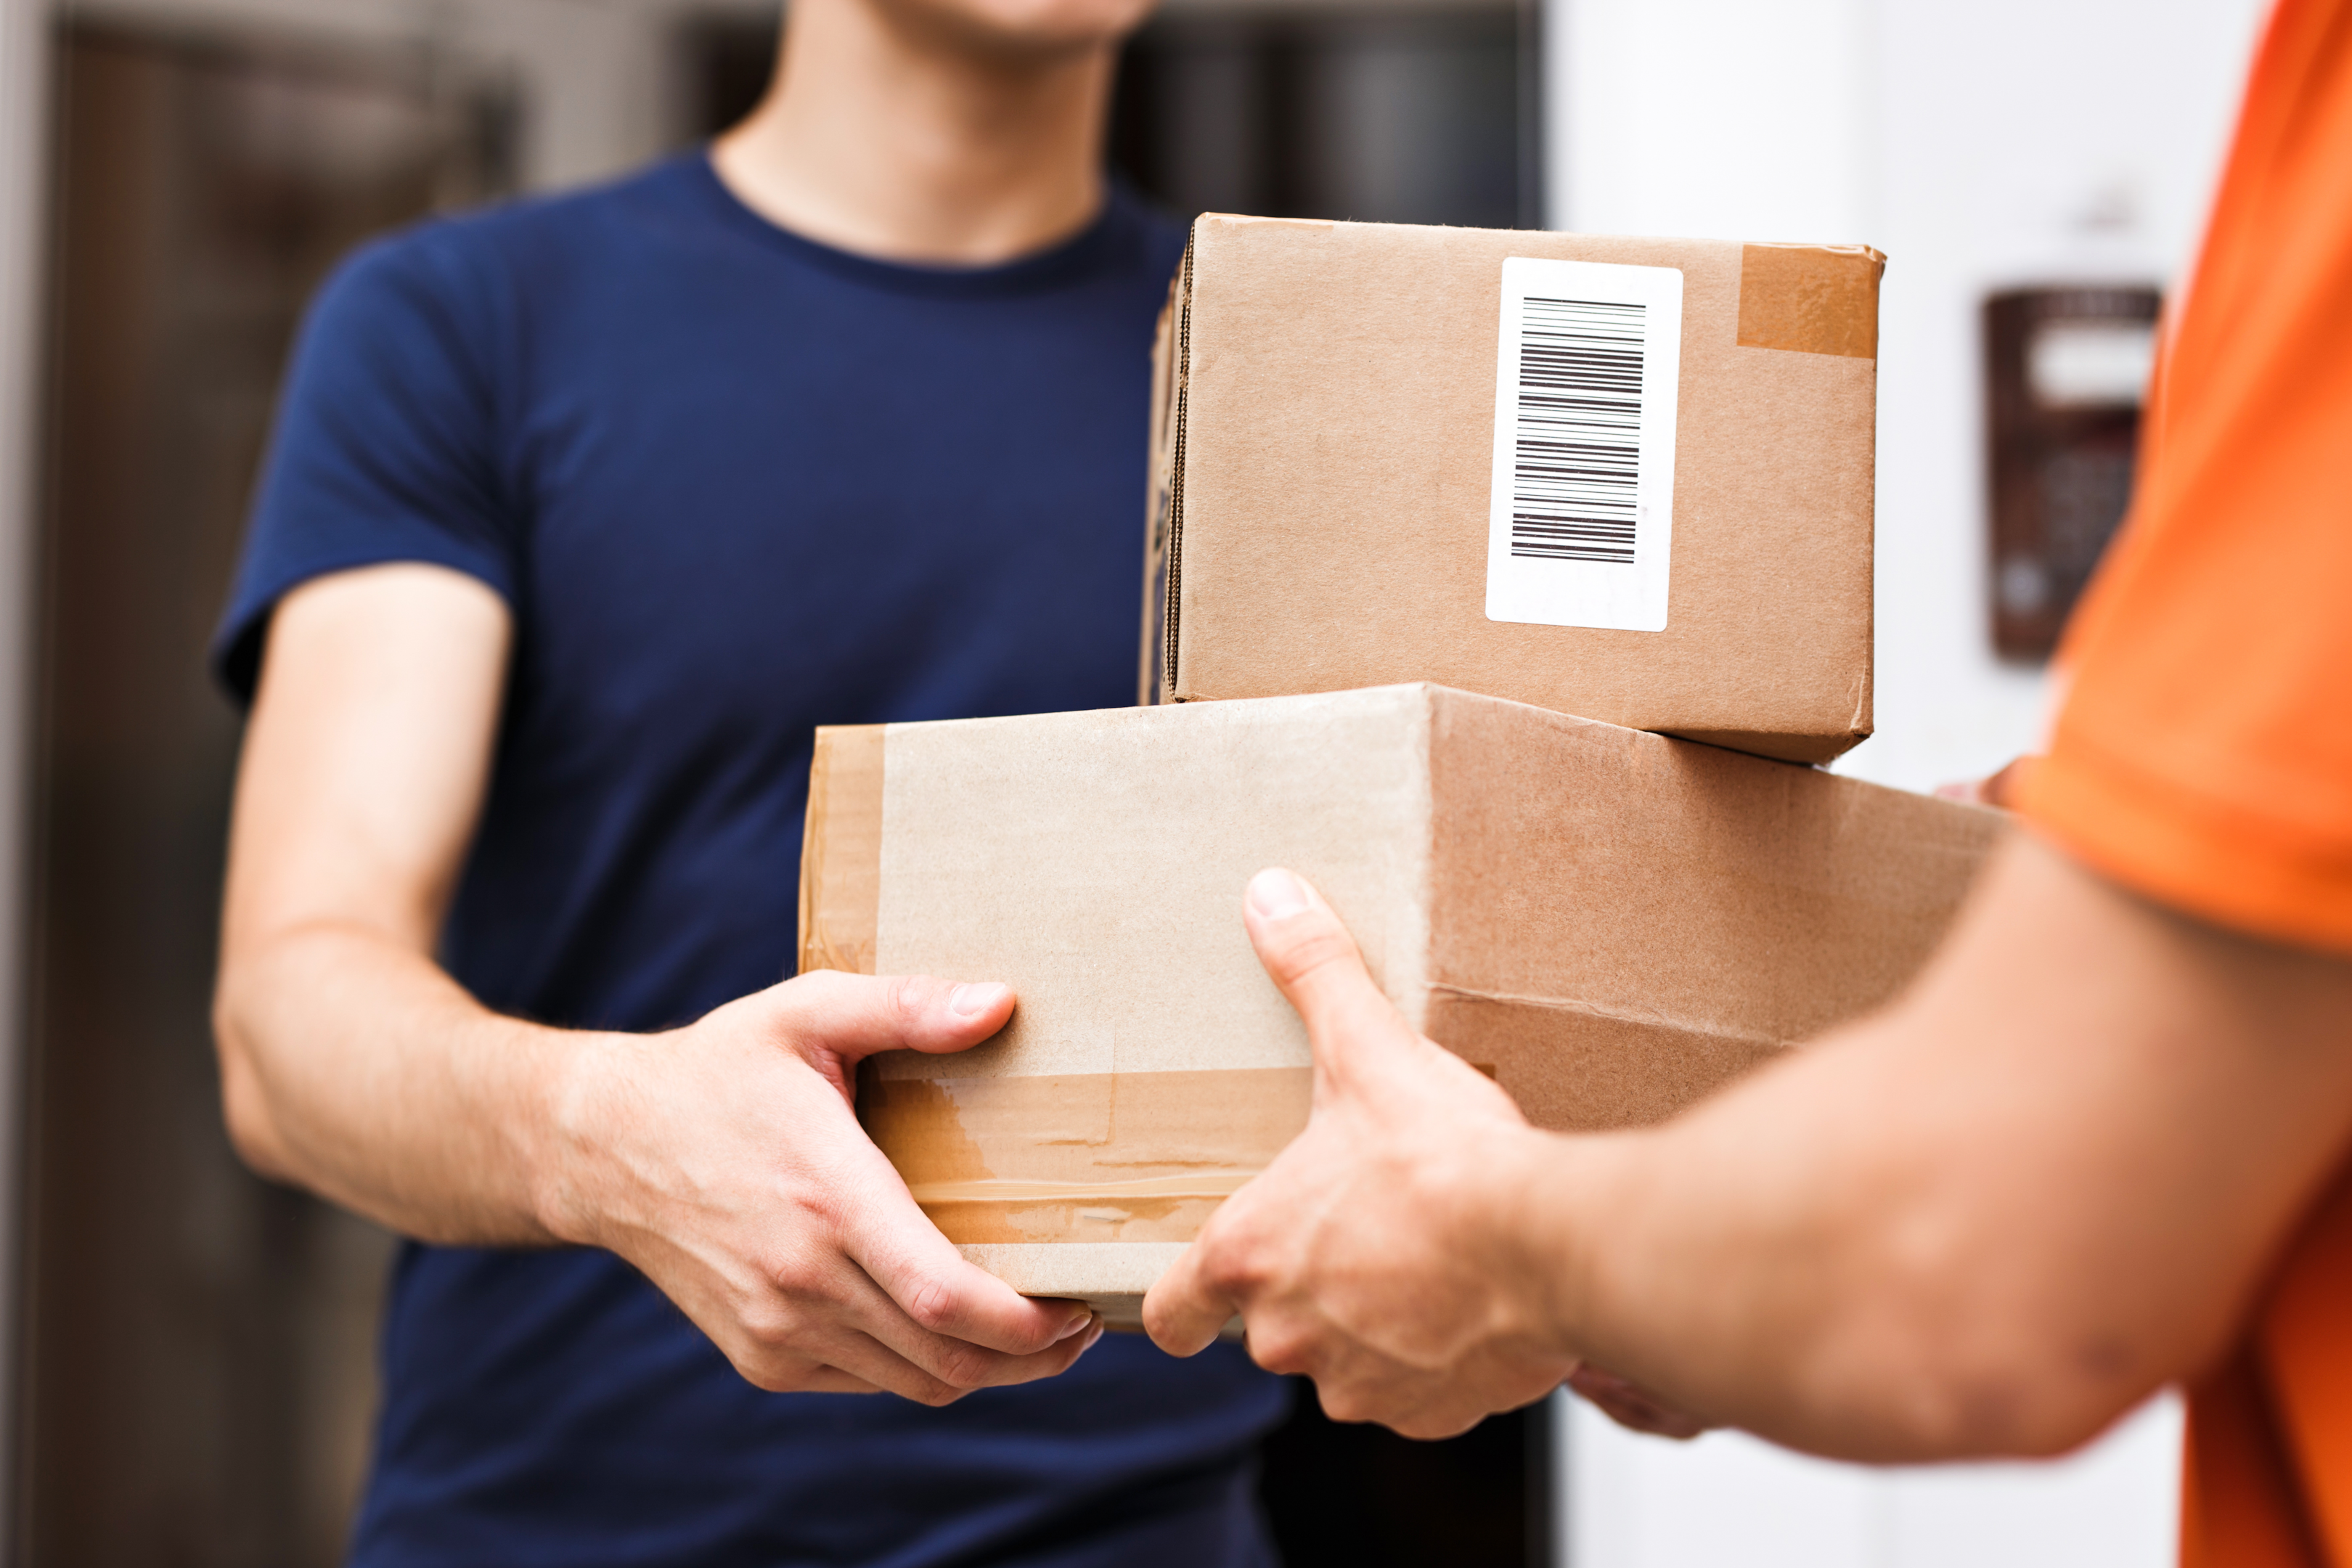 You can buy Delta 9 products online, and we will ship right to your door as long as you live in a state that allows.